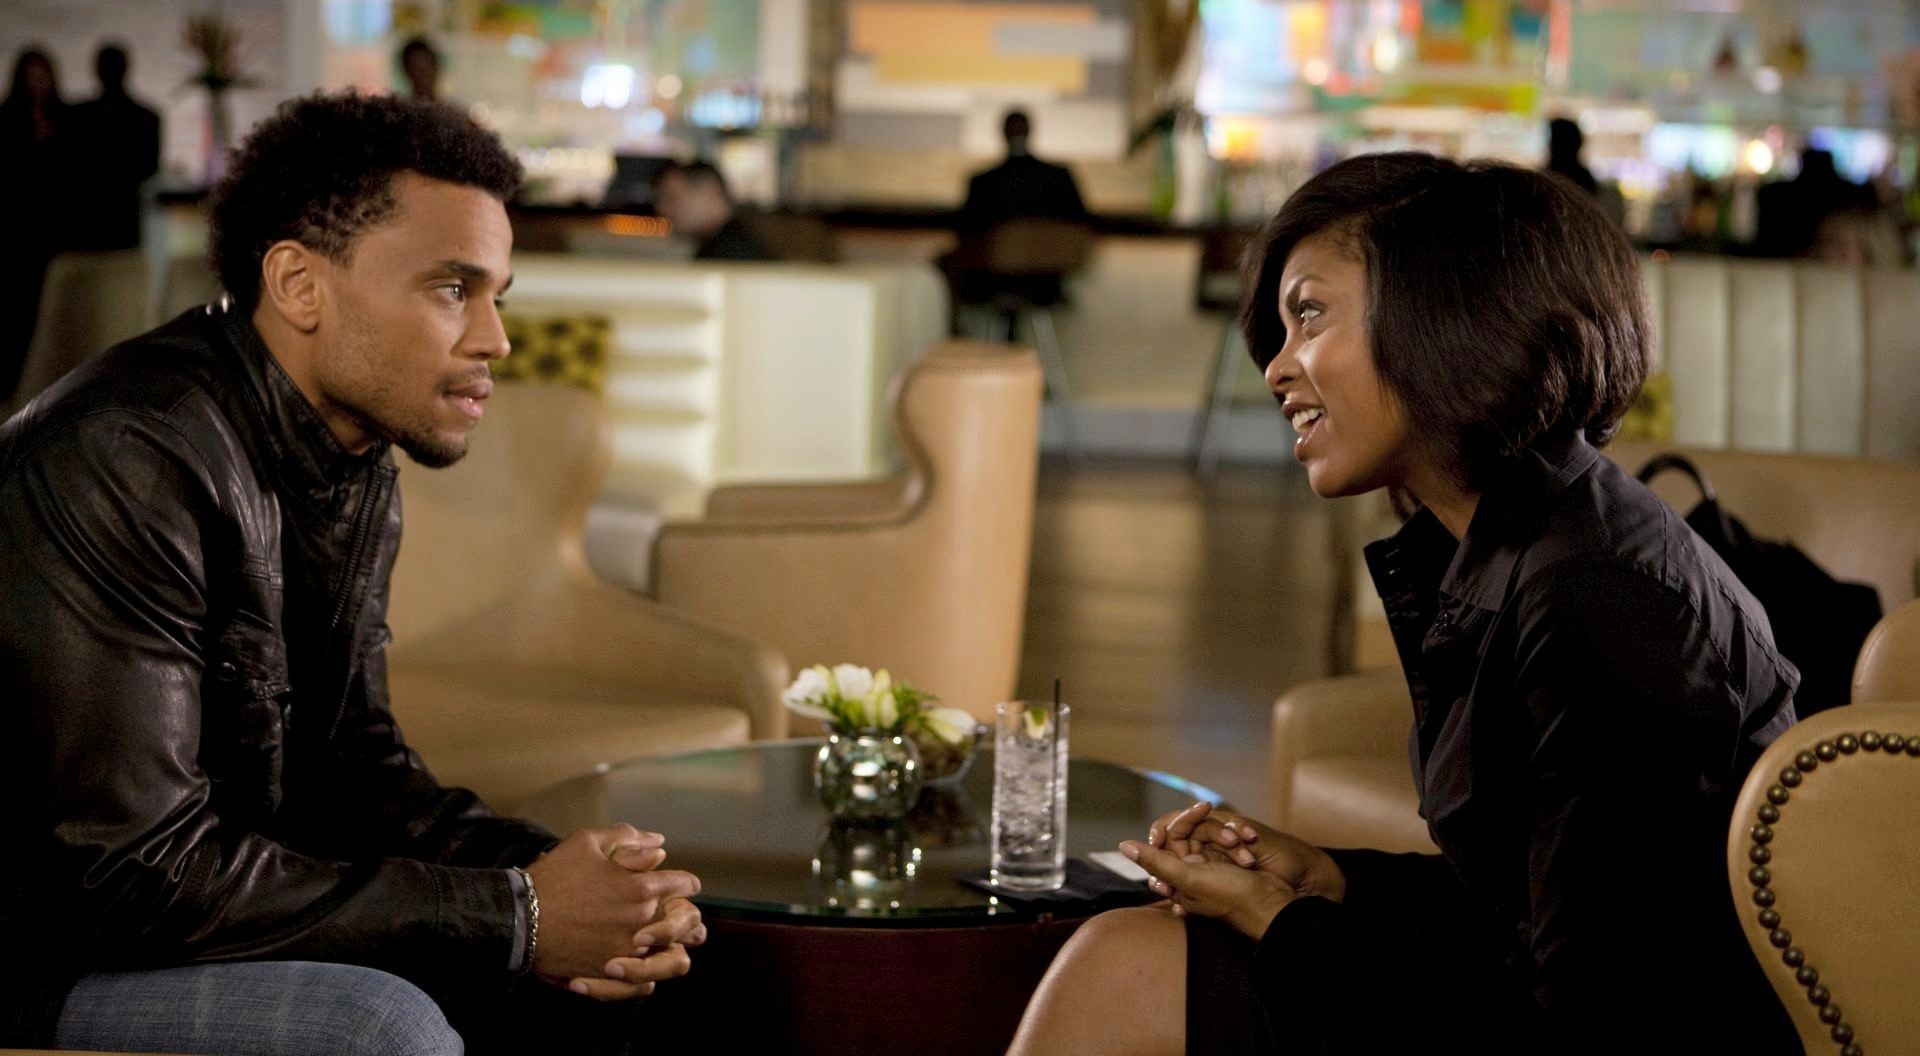 Michael Ealy stars as Dominic and Taraji P. Henson in Screen Gems' Think Like a Man (2012). Photo credit by Photo by Alan Markfield.